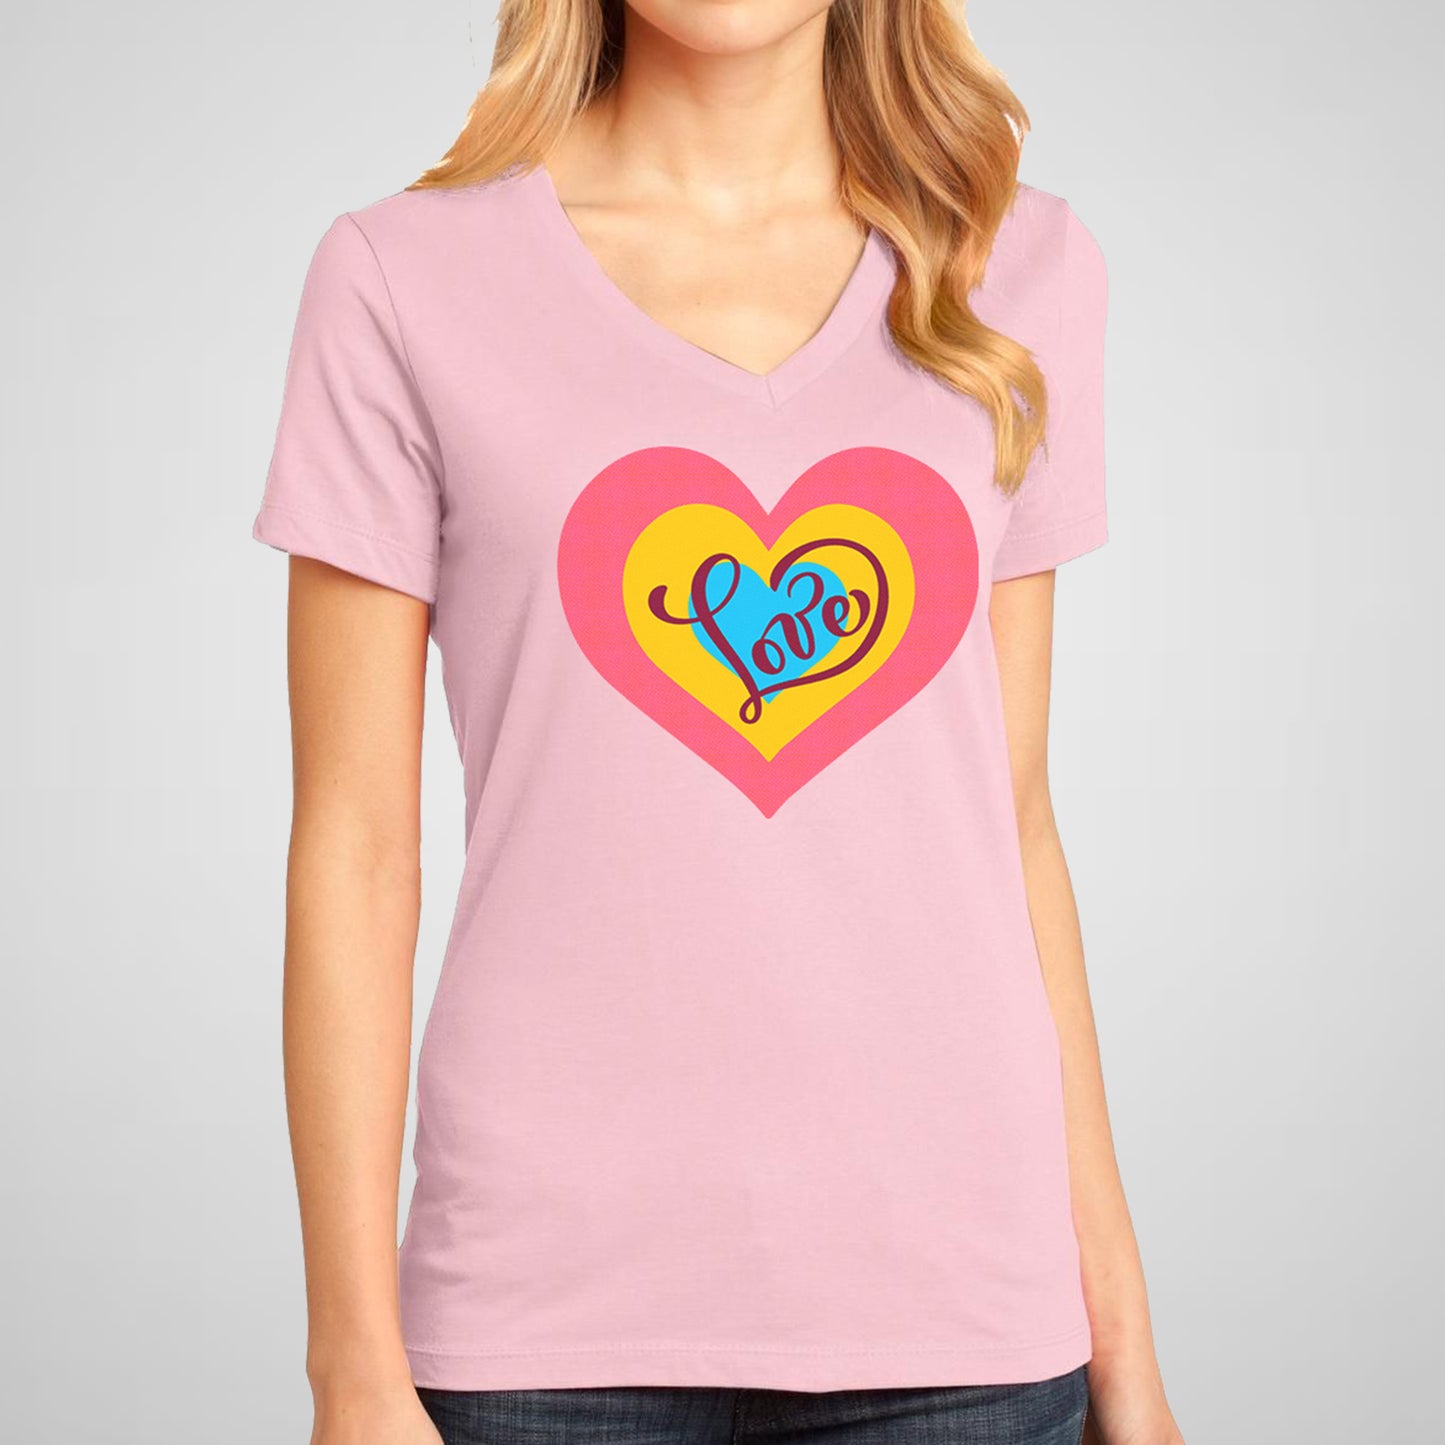 Colorful Heart - Women's Cotton V-Neck Tee